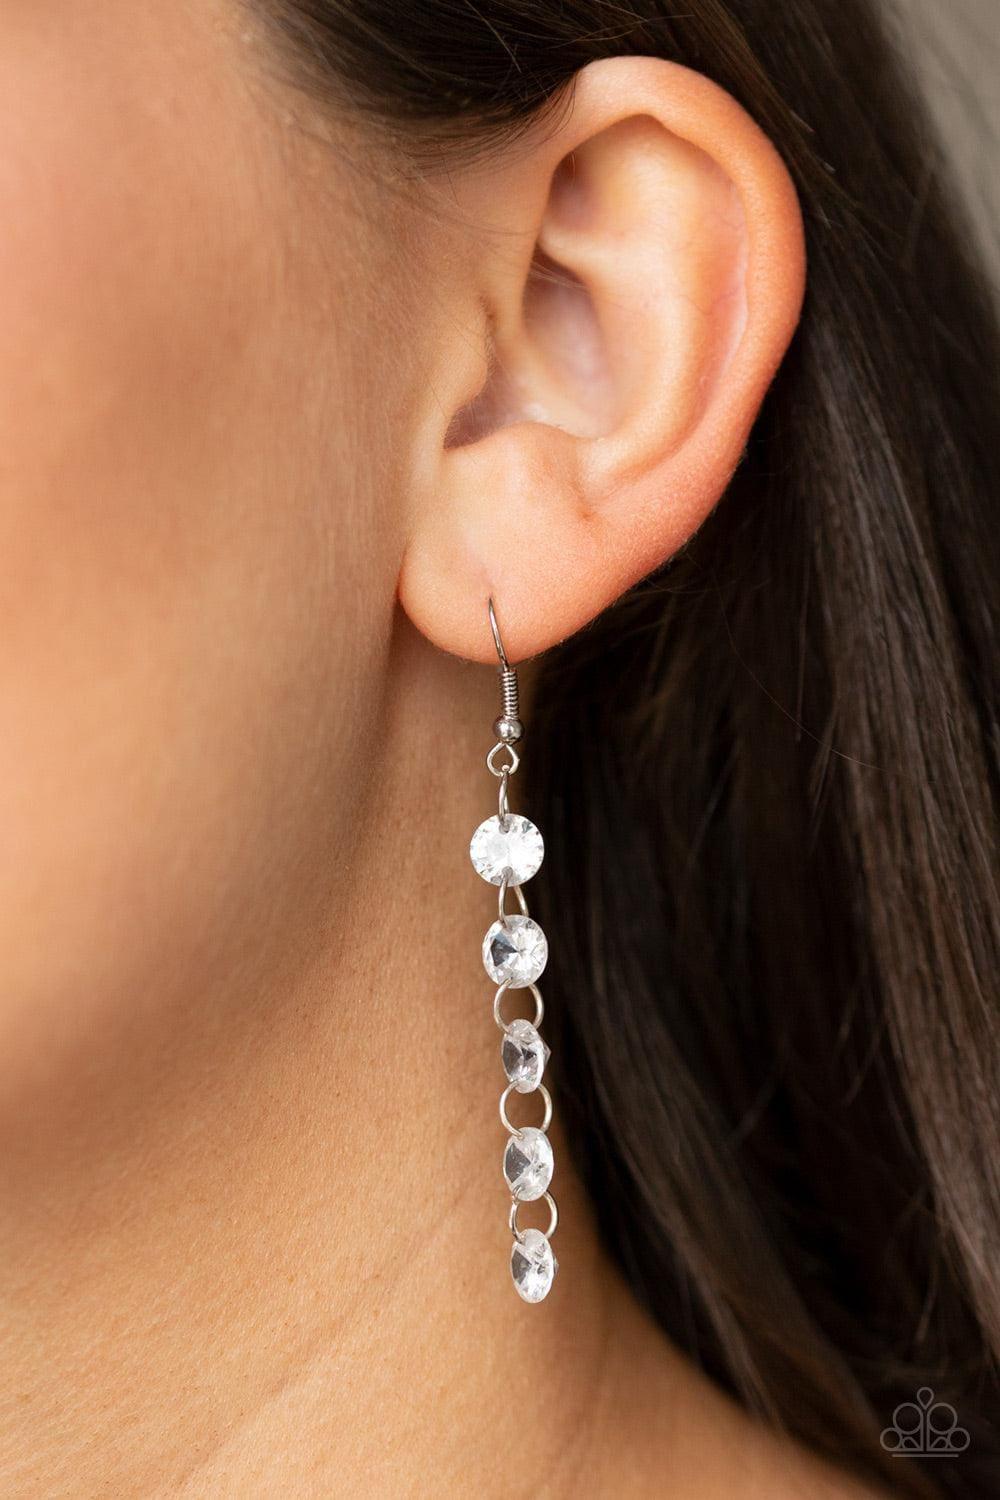 Paparazzi Accessories - Trickle-down Effect - White Earrings - Bling by JessieK